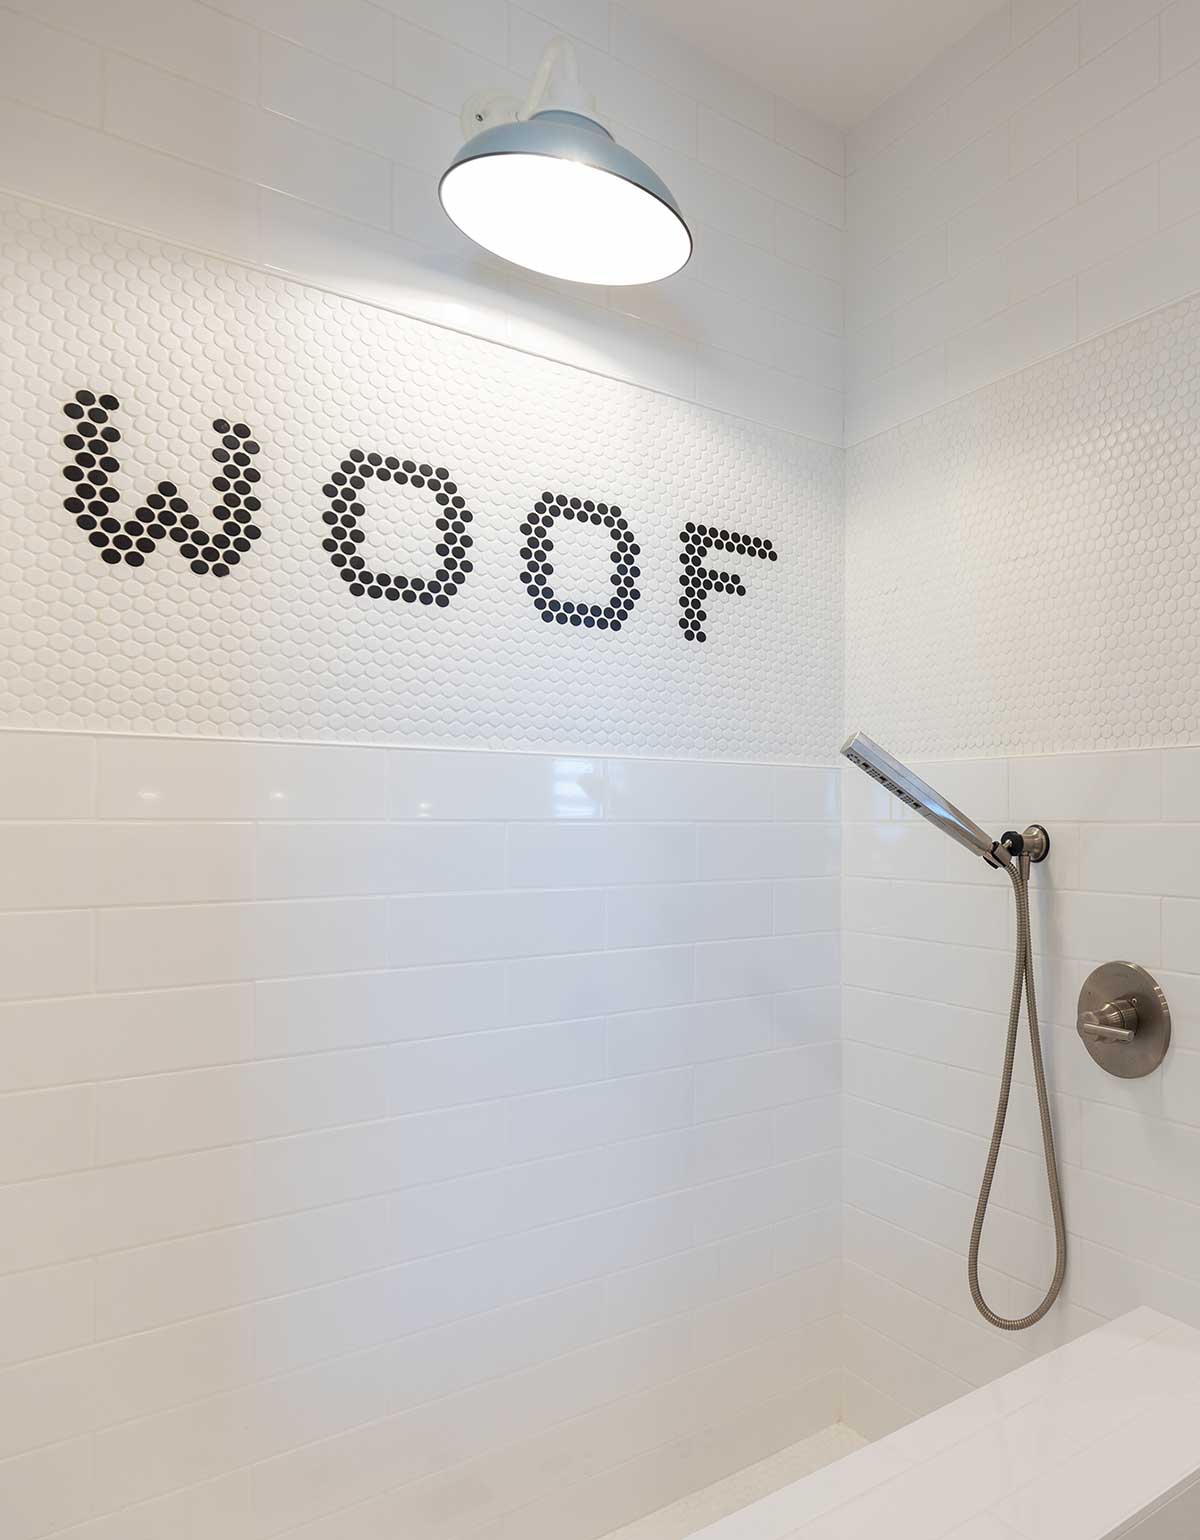 A dog bath with "woof" written in tile.